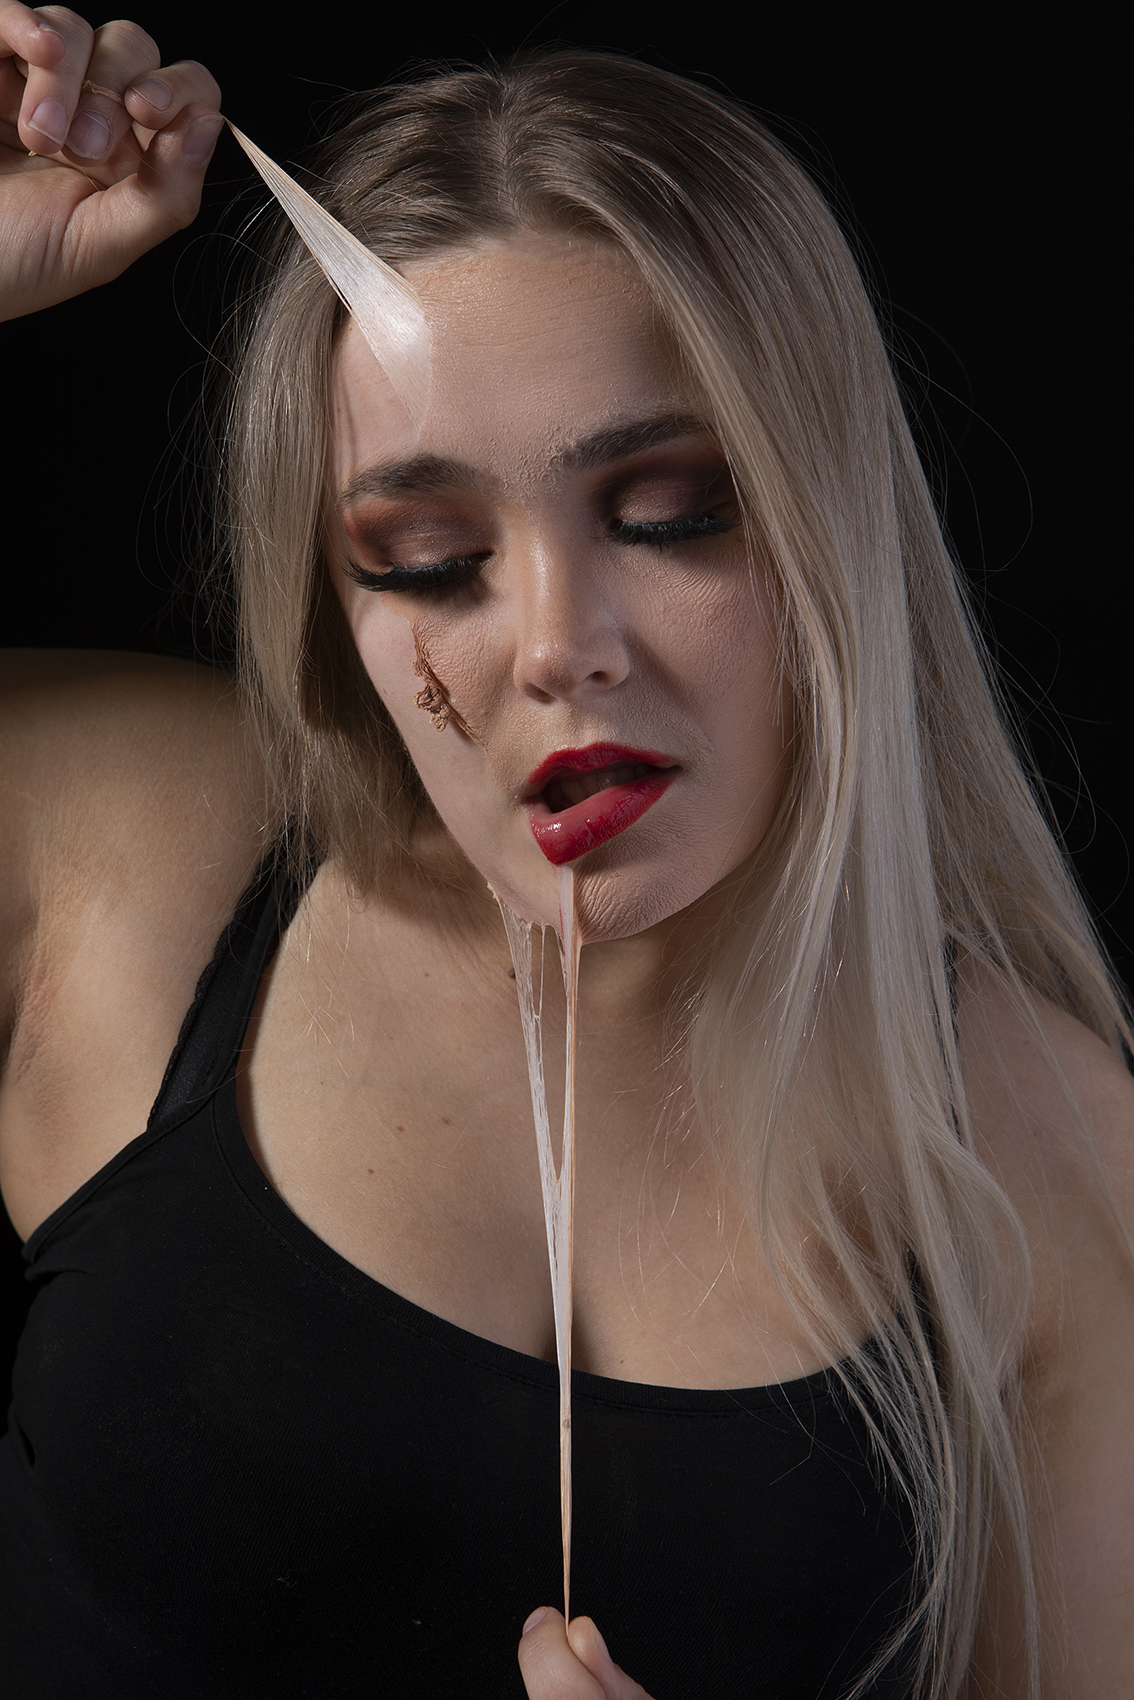 Black background, woman captured with liquid latex on her face pulling it off.